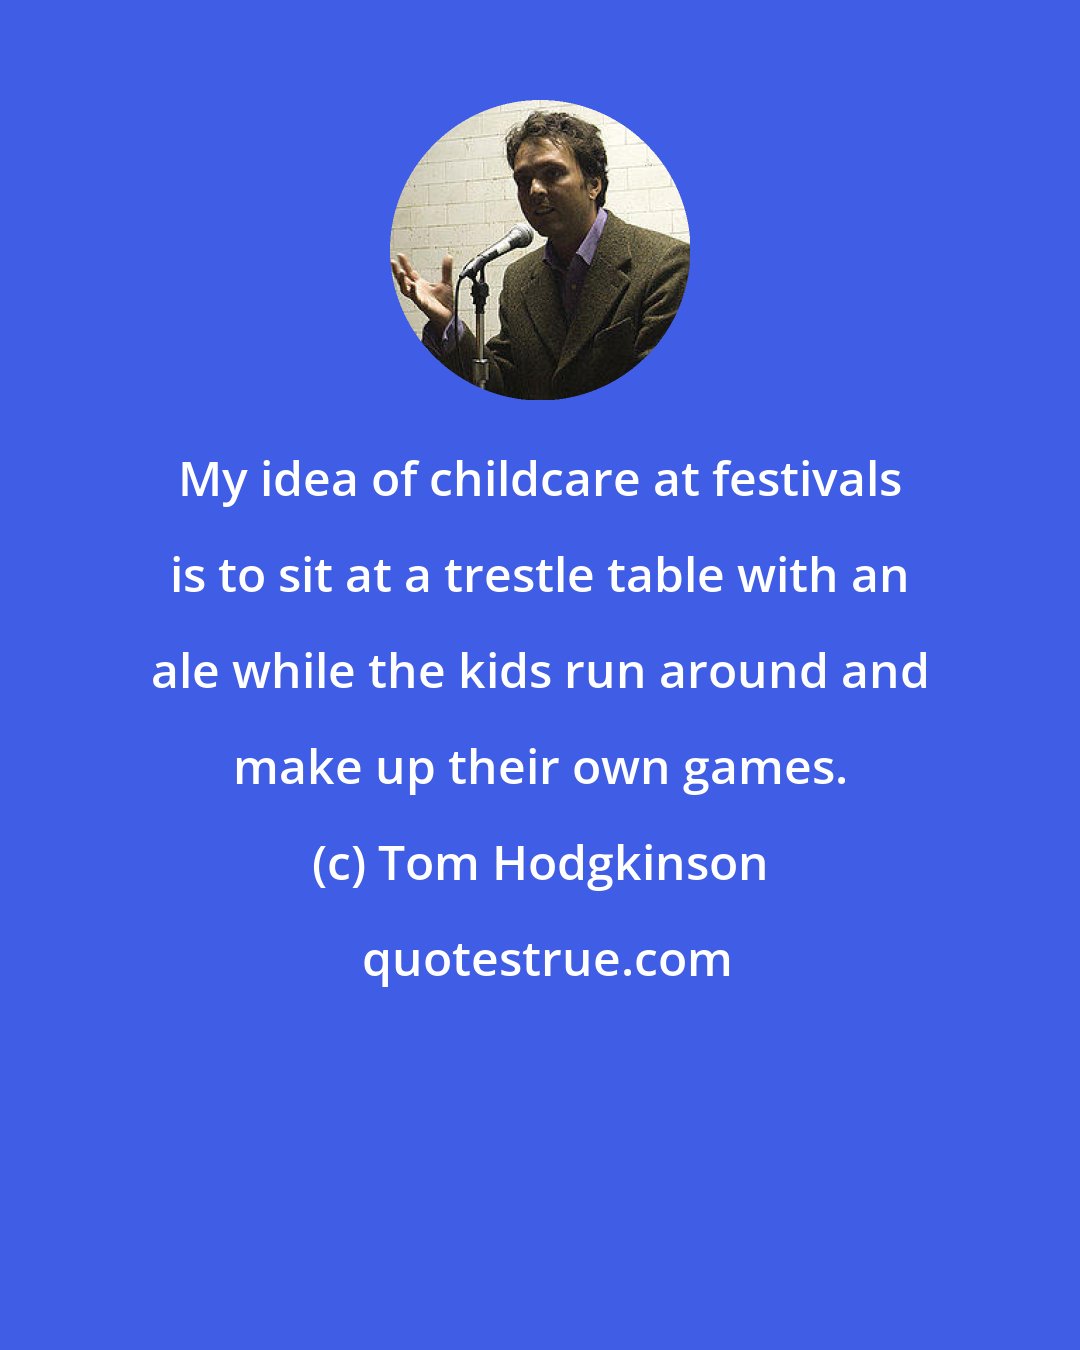 Tom Hodgkinson: My idea of childcare at festivals is to sit at a trestle table with an ale while the kids run around and make up their own games.